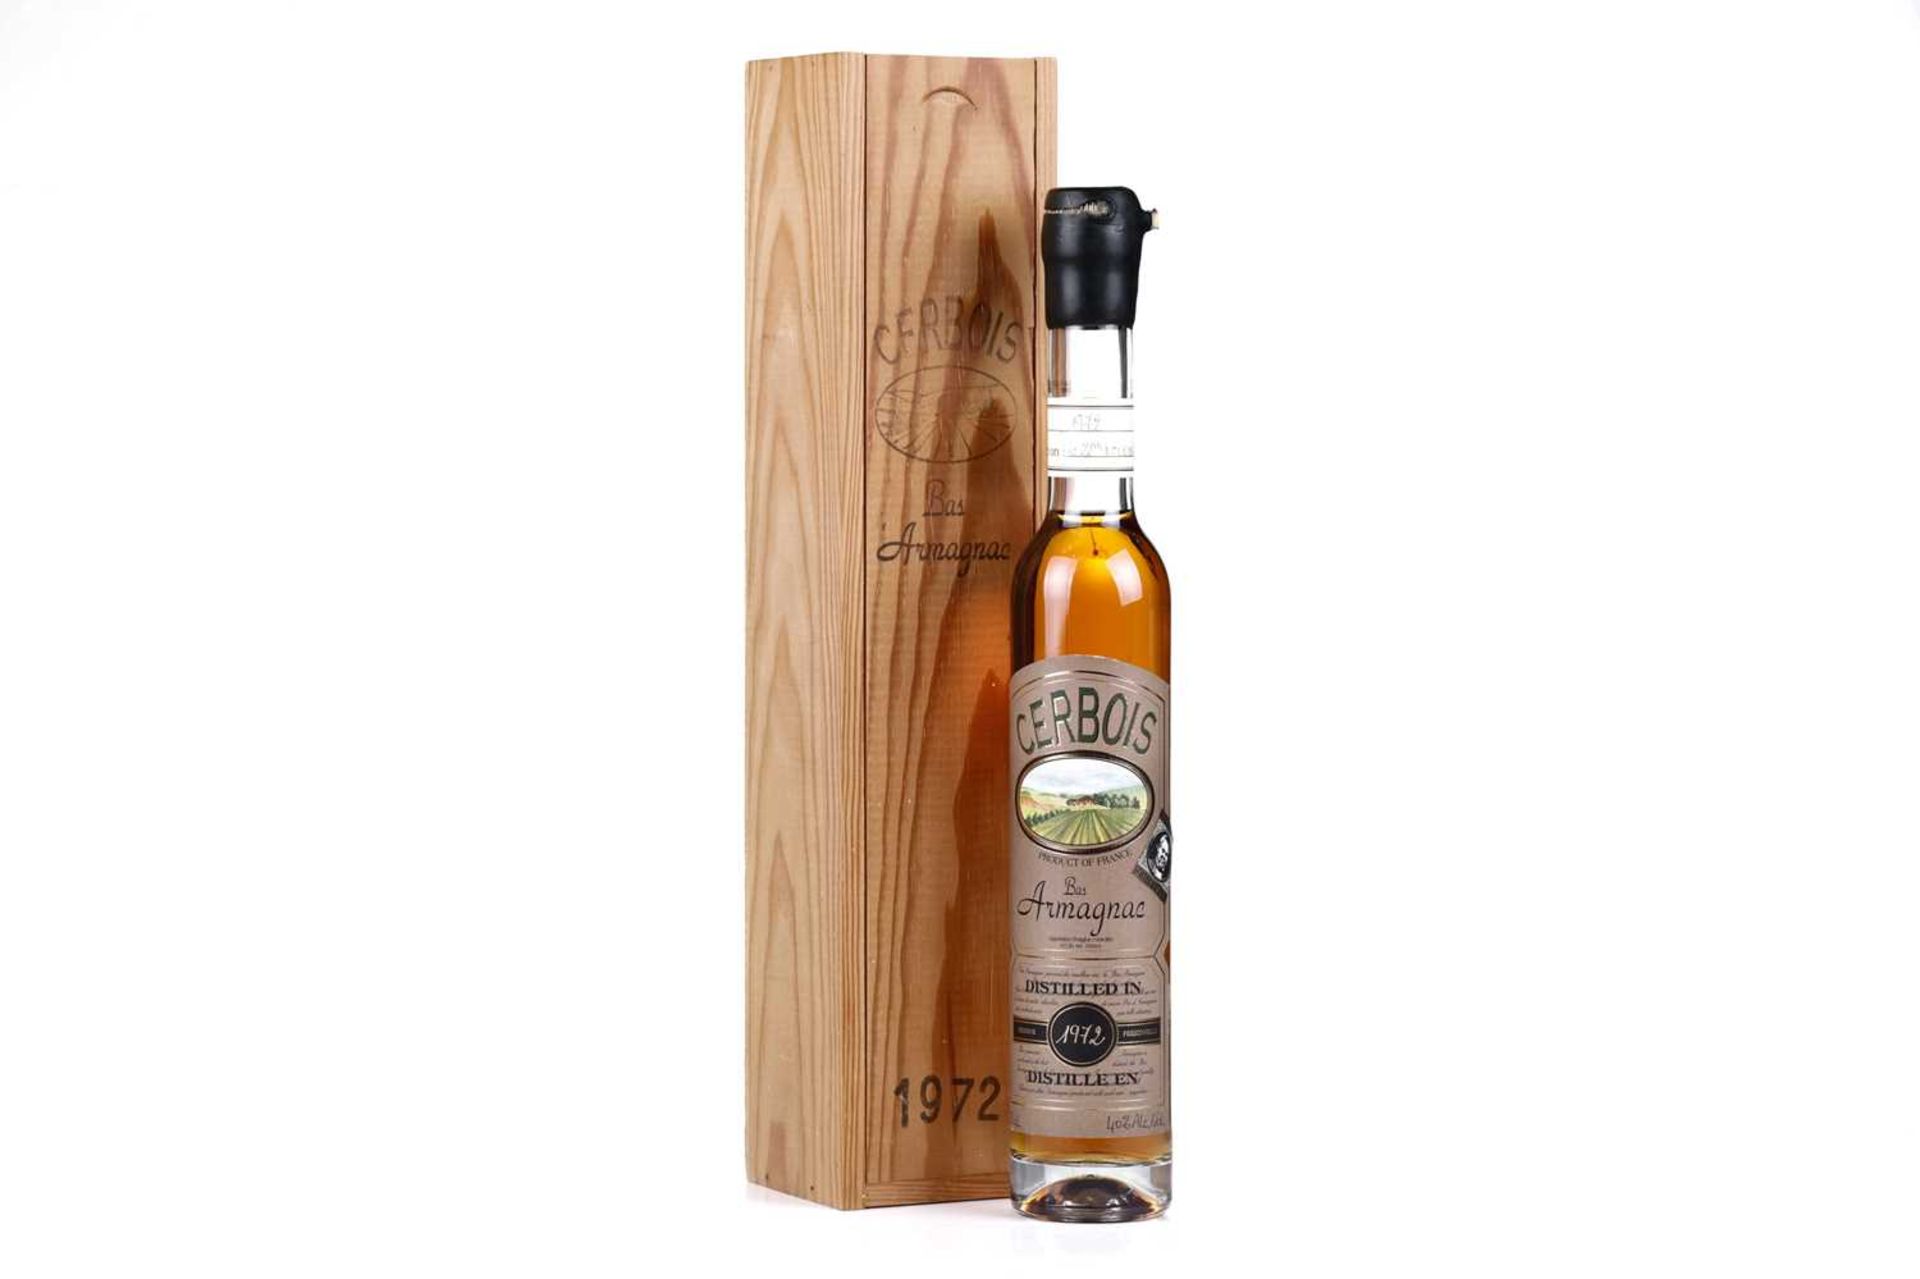 Murray McDavid Bowmore 1989, Scotch whisky, Cerbois 1972 Armagnac, boxed, Chateau Miraval 'Pink - Image 10 of 18